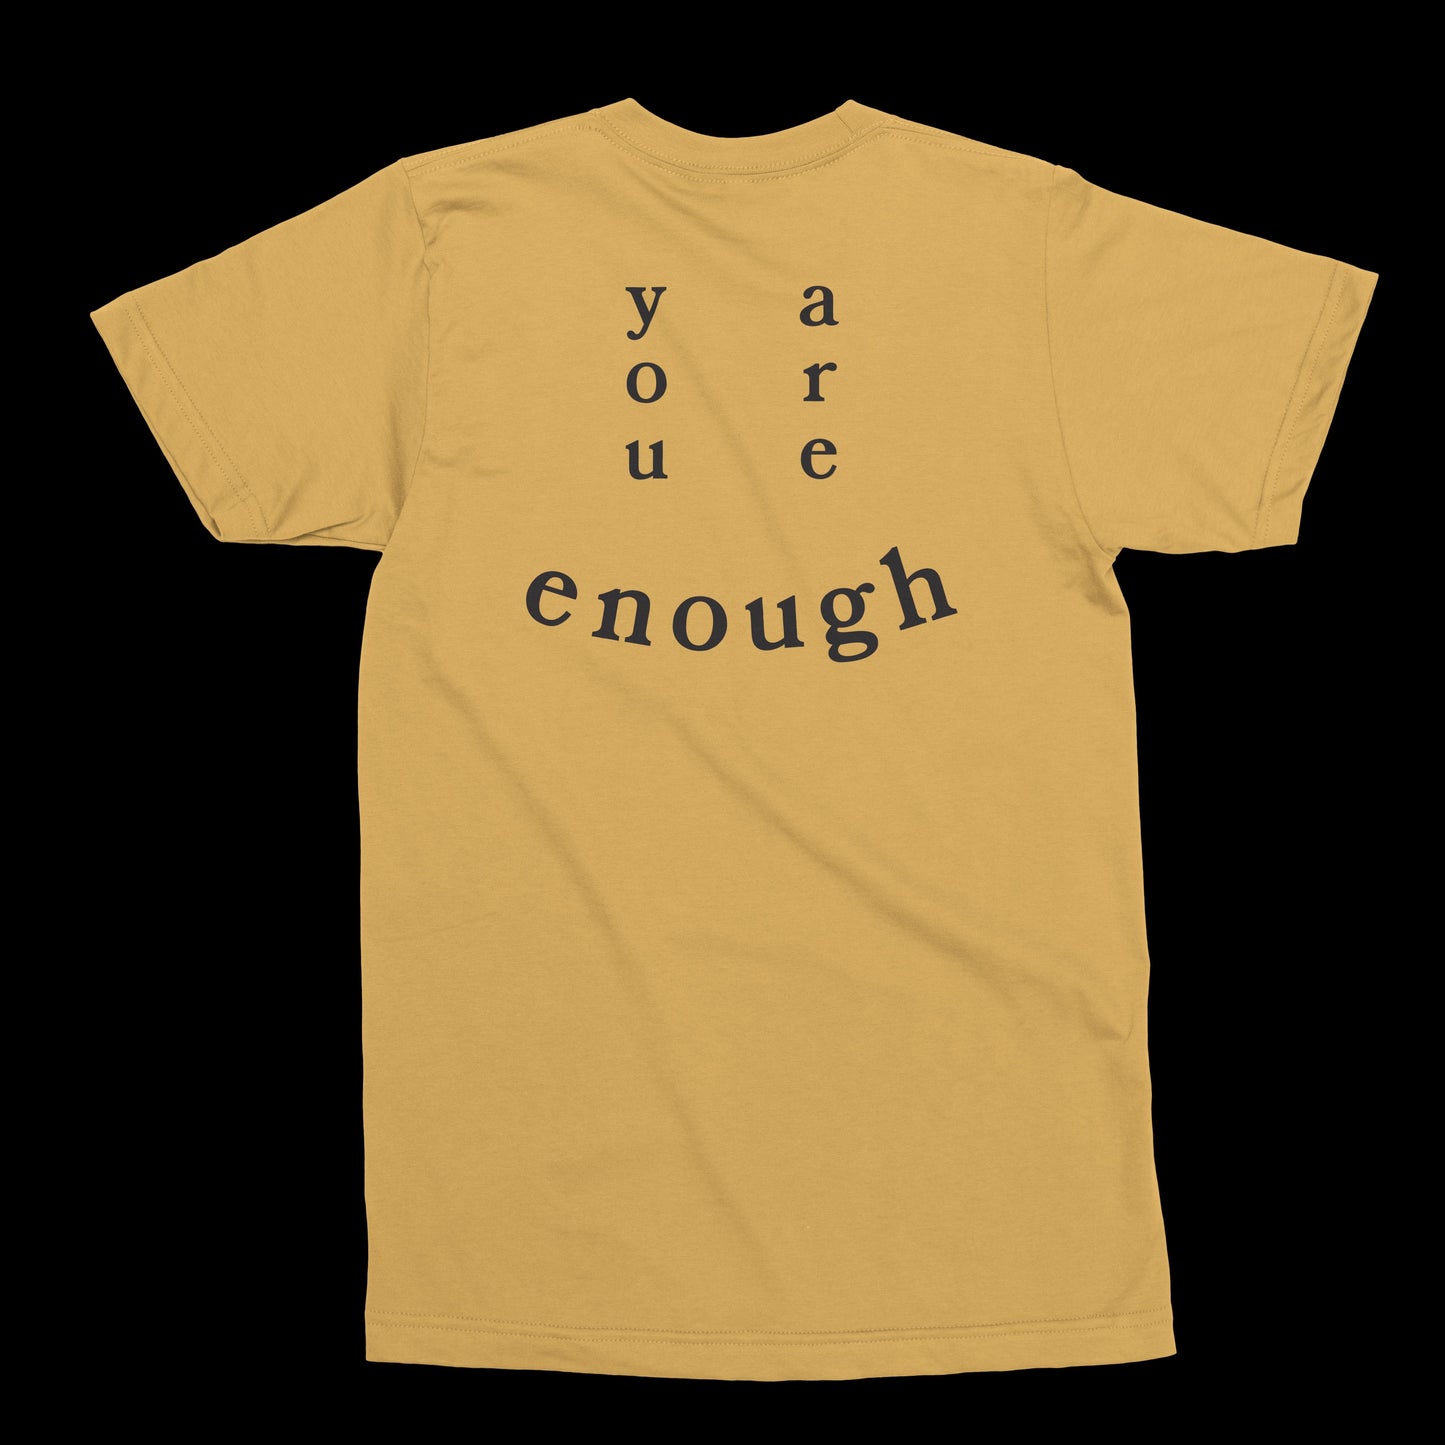 keep going - you are enough - t-shirt